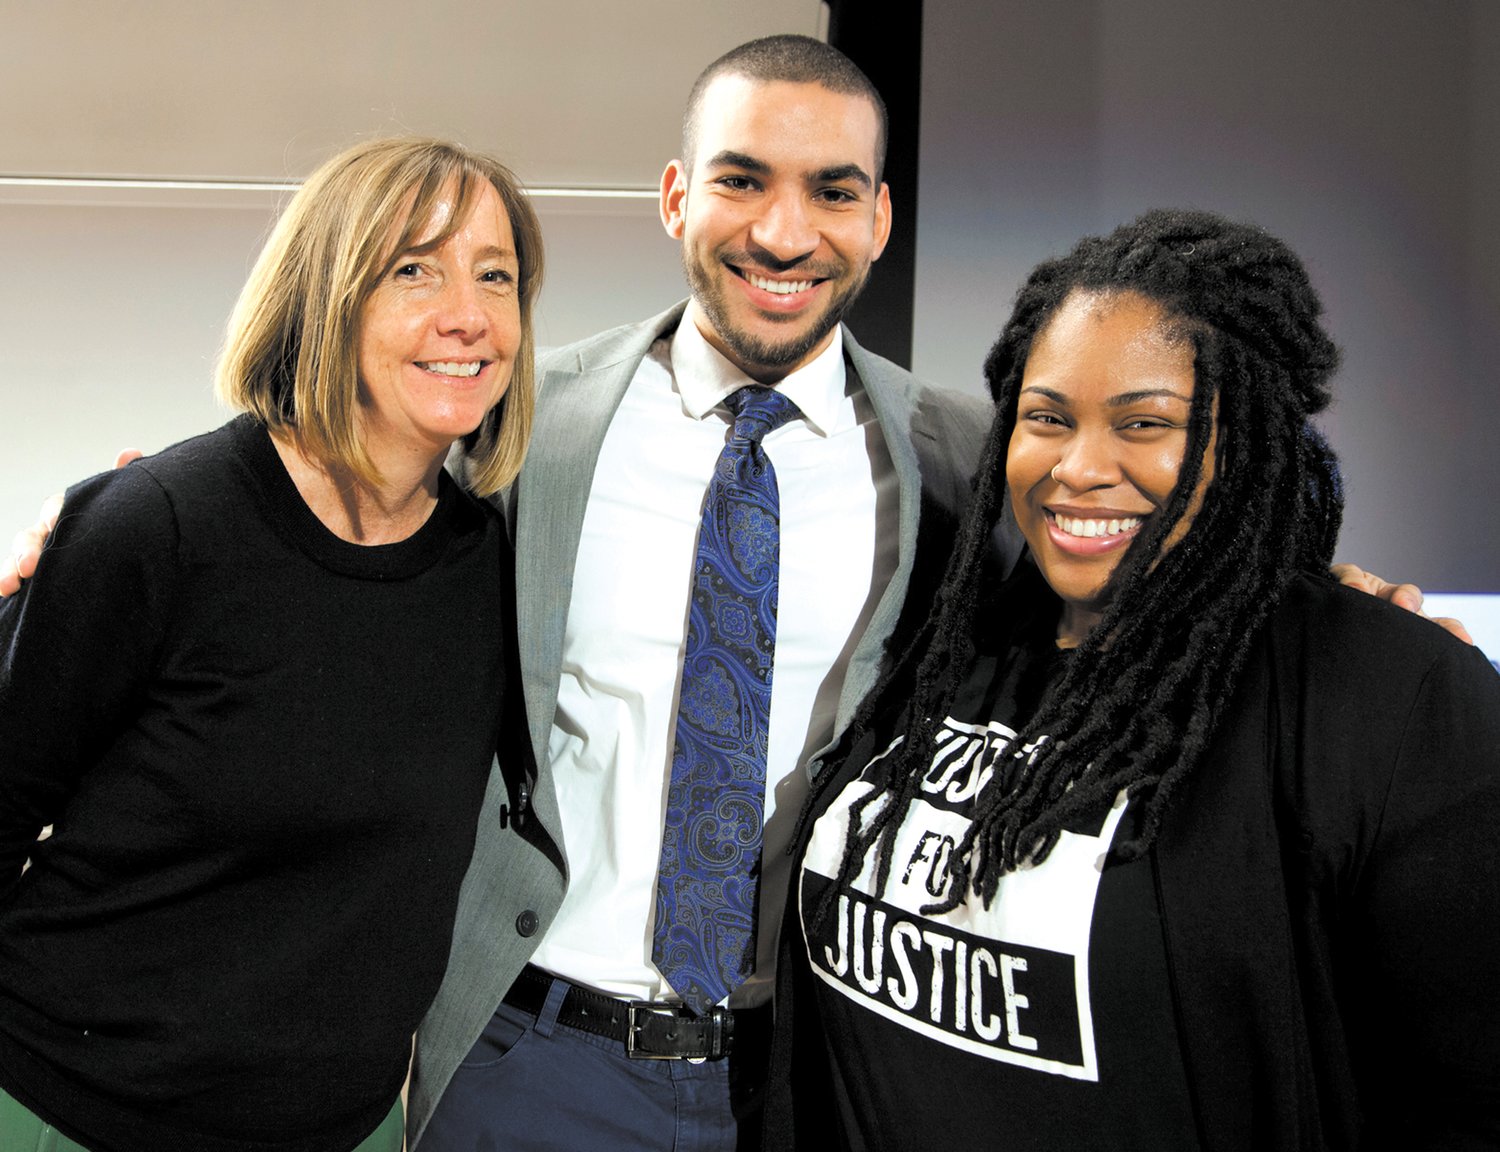 JOINING THE CAUSE: Kate Lentz, left, director of the Rhode Island Center for the Book as pictured with Jordan Seaberry and Angie Thomas. The organization has joined in efforts to prevent censor books.